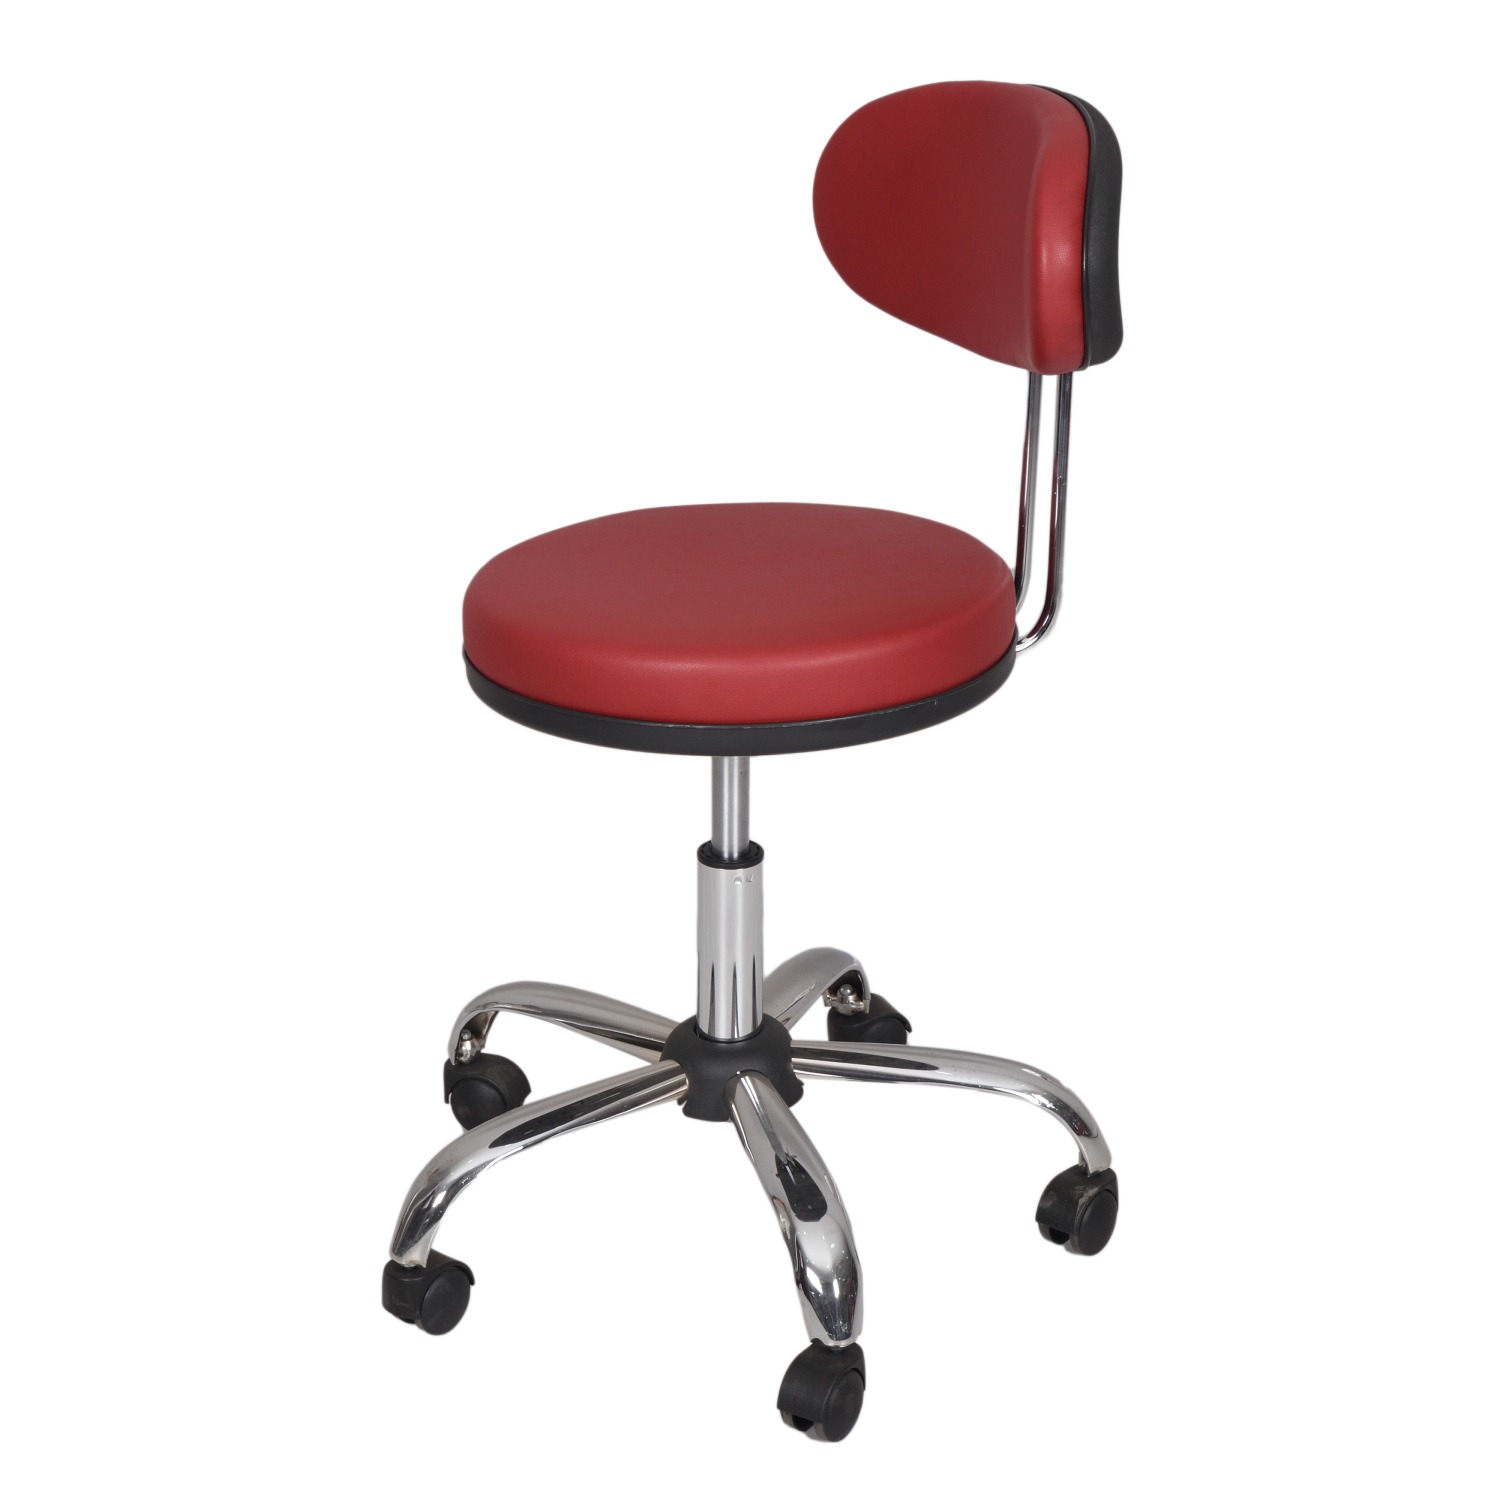 Medical Stool with Oval Backrest (Red)